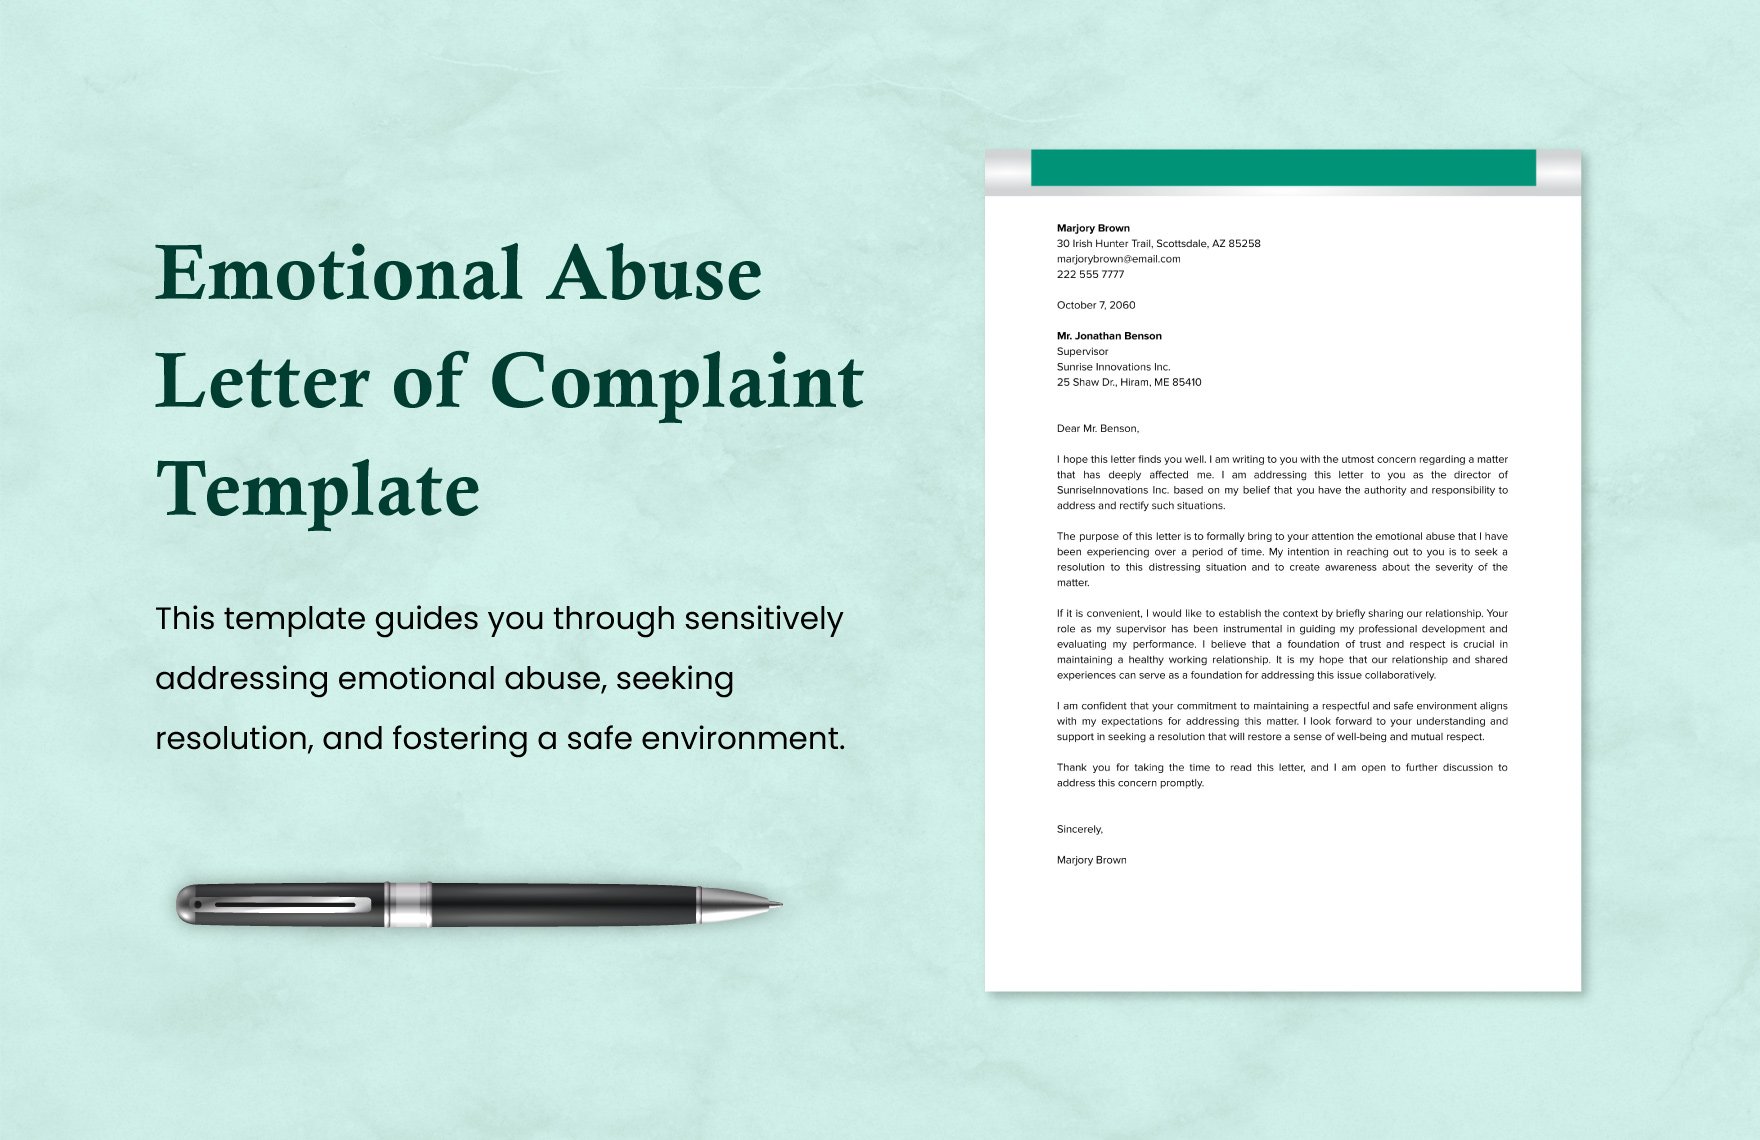 Emotional Abuse Letter of Complaint Template